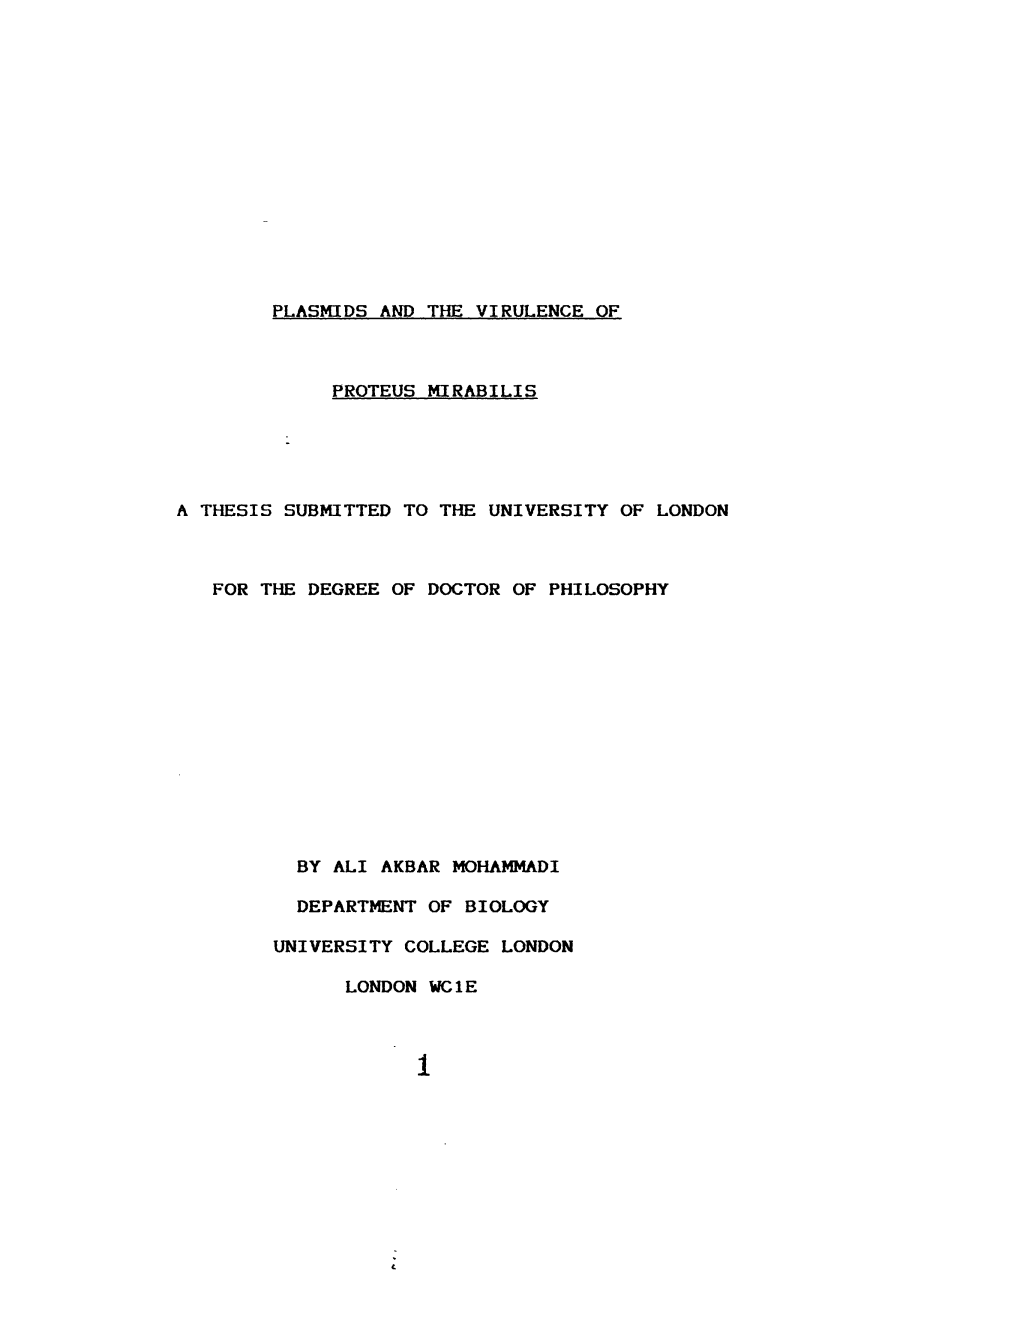 Plasmids and the Virulence of Proteus Mirabilis a Thesis Submitted to the University of London for the Degree of Doctor of Philo